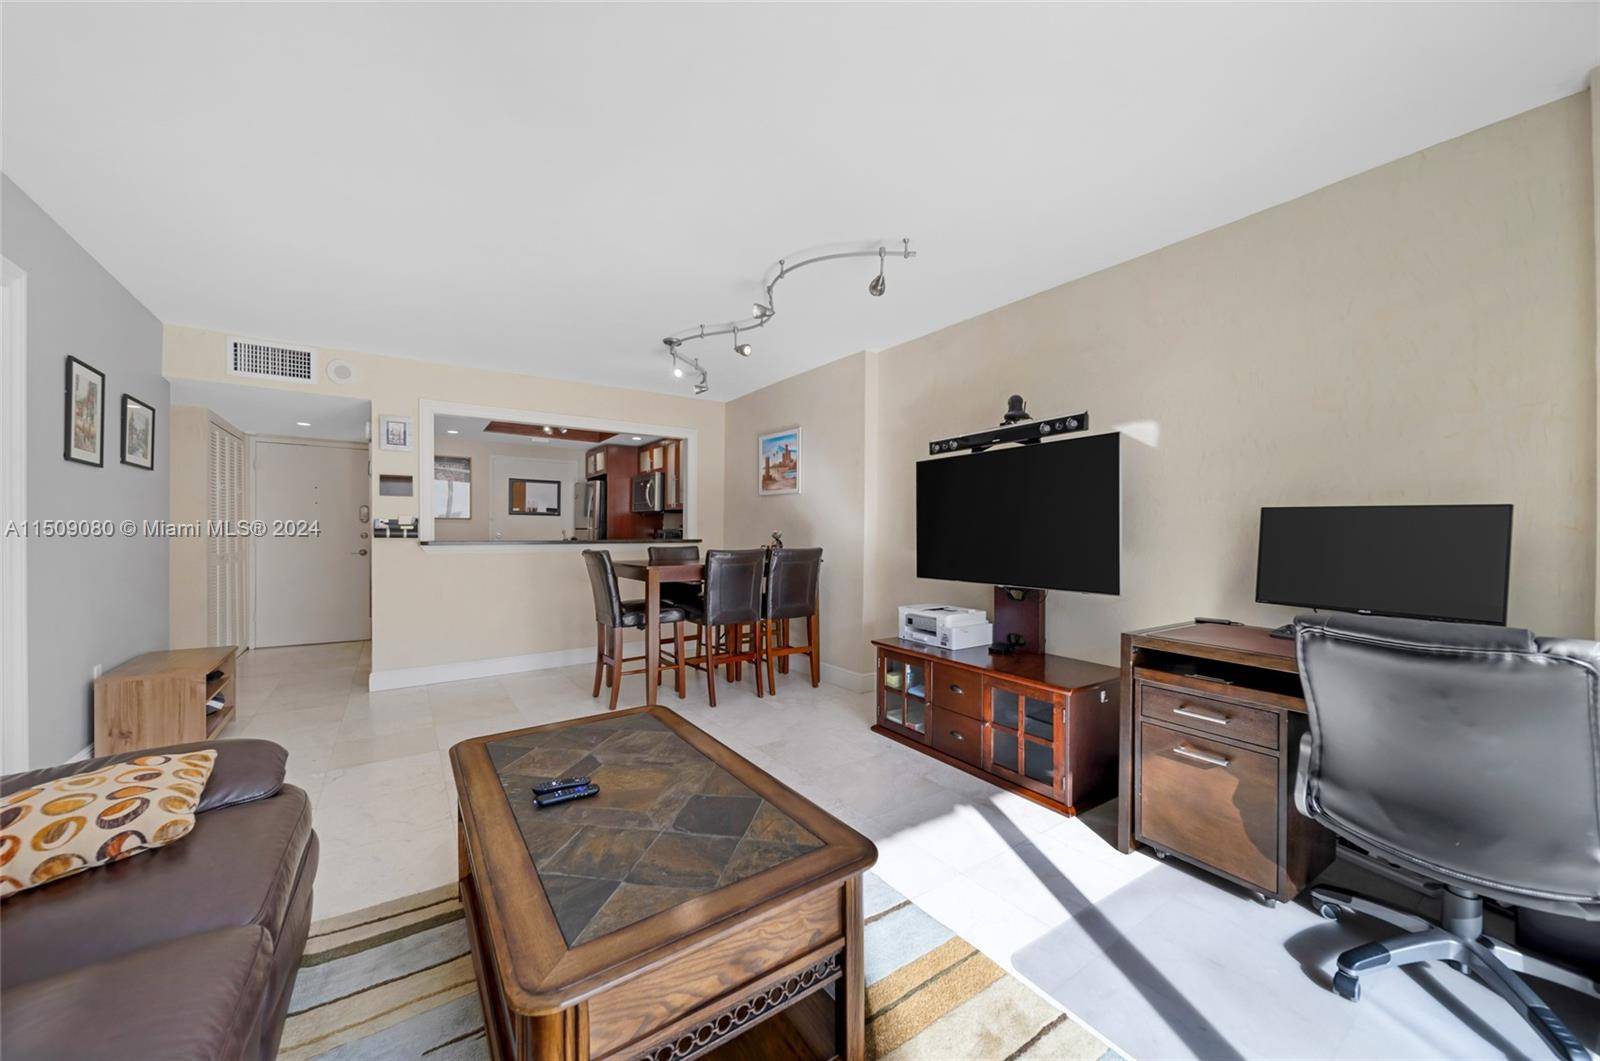 Remodeled 1 bed 1 bath with a modern and neutral taste, travertine floors and Venetian plaster walls.